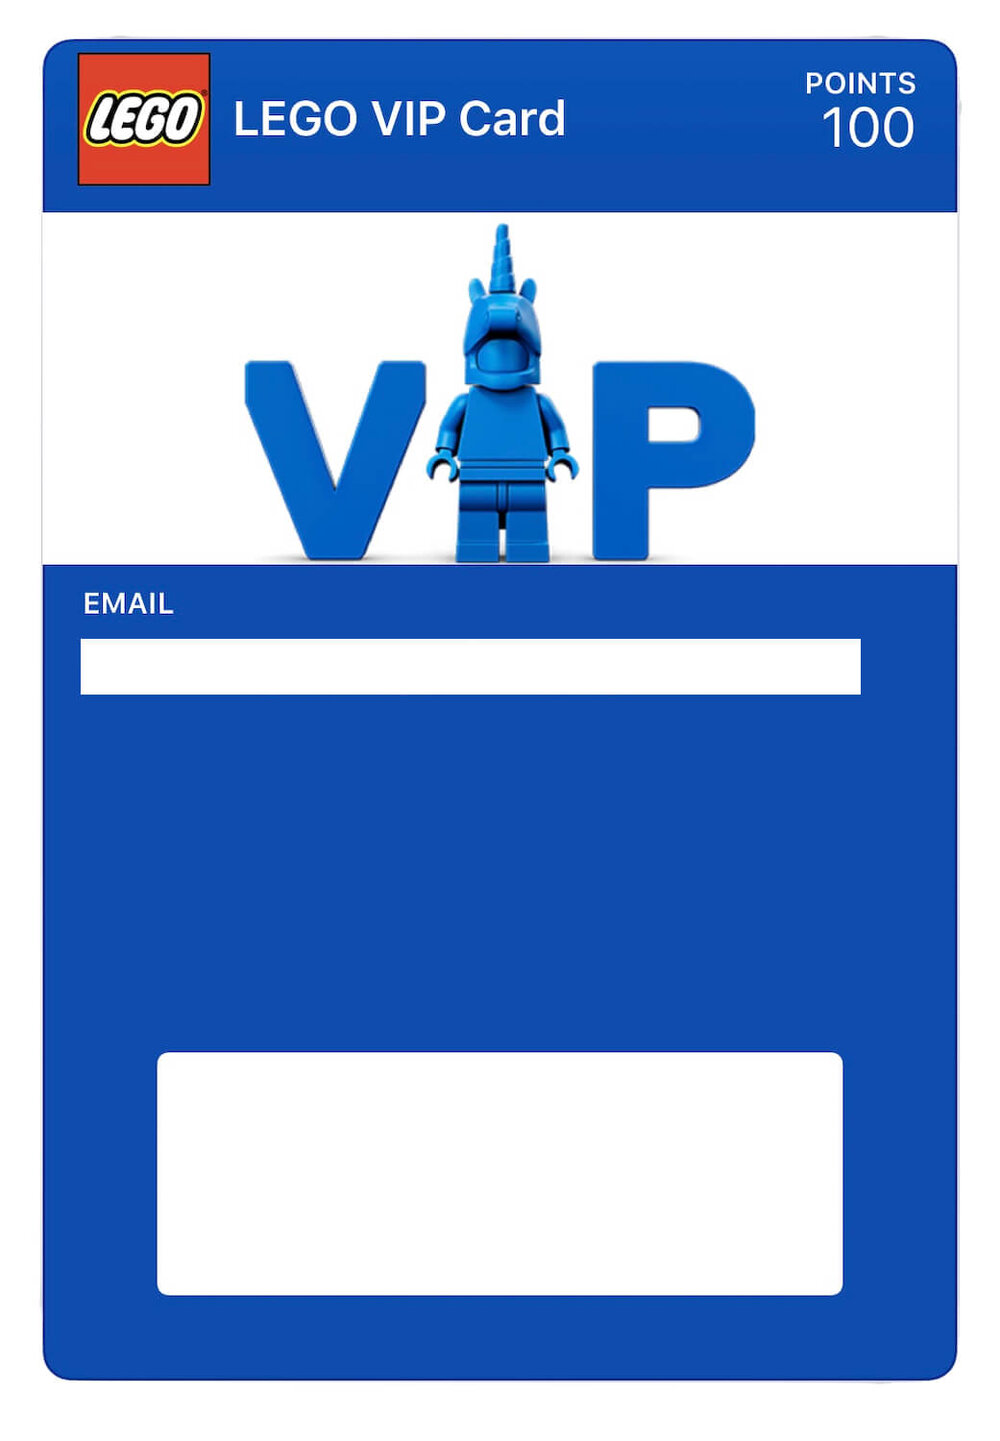 Akkumulerede inden for Niende The Ultimate Guide To LEGO VIP Points | Capital Matters